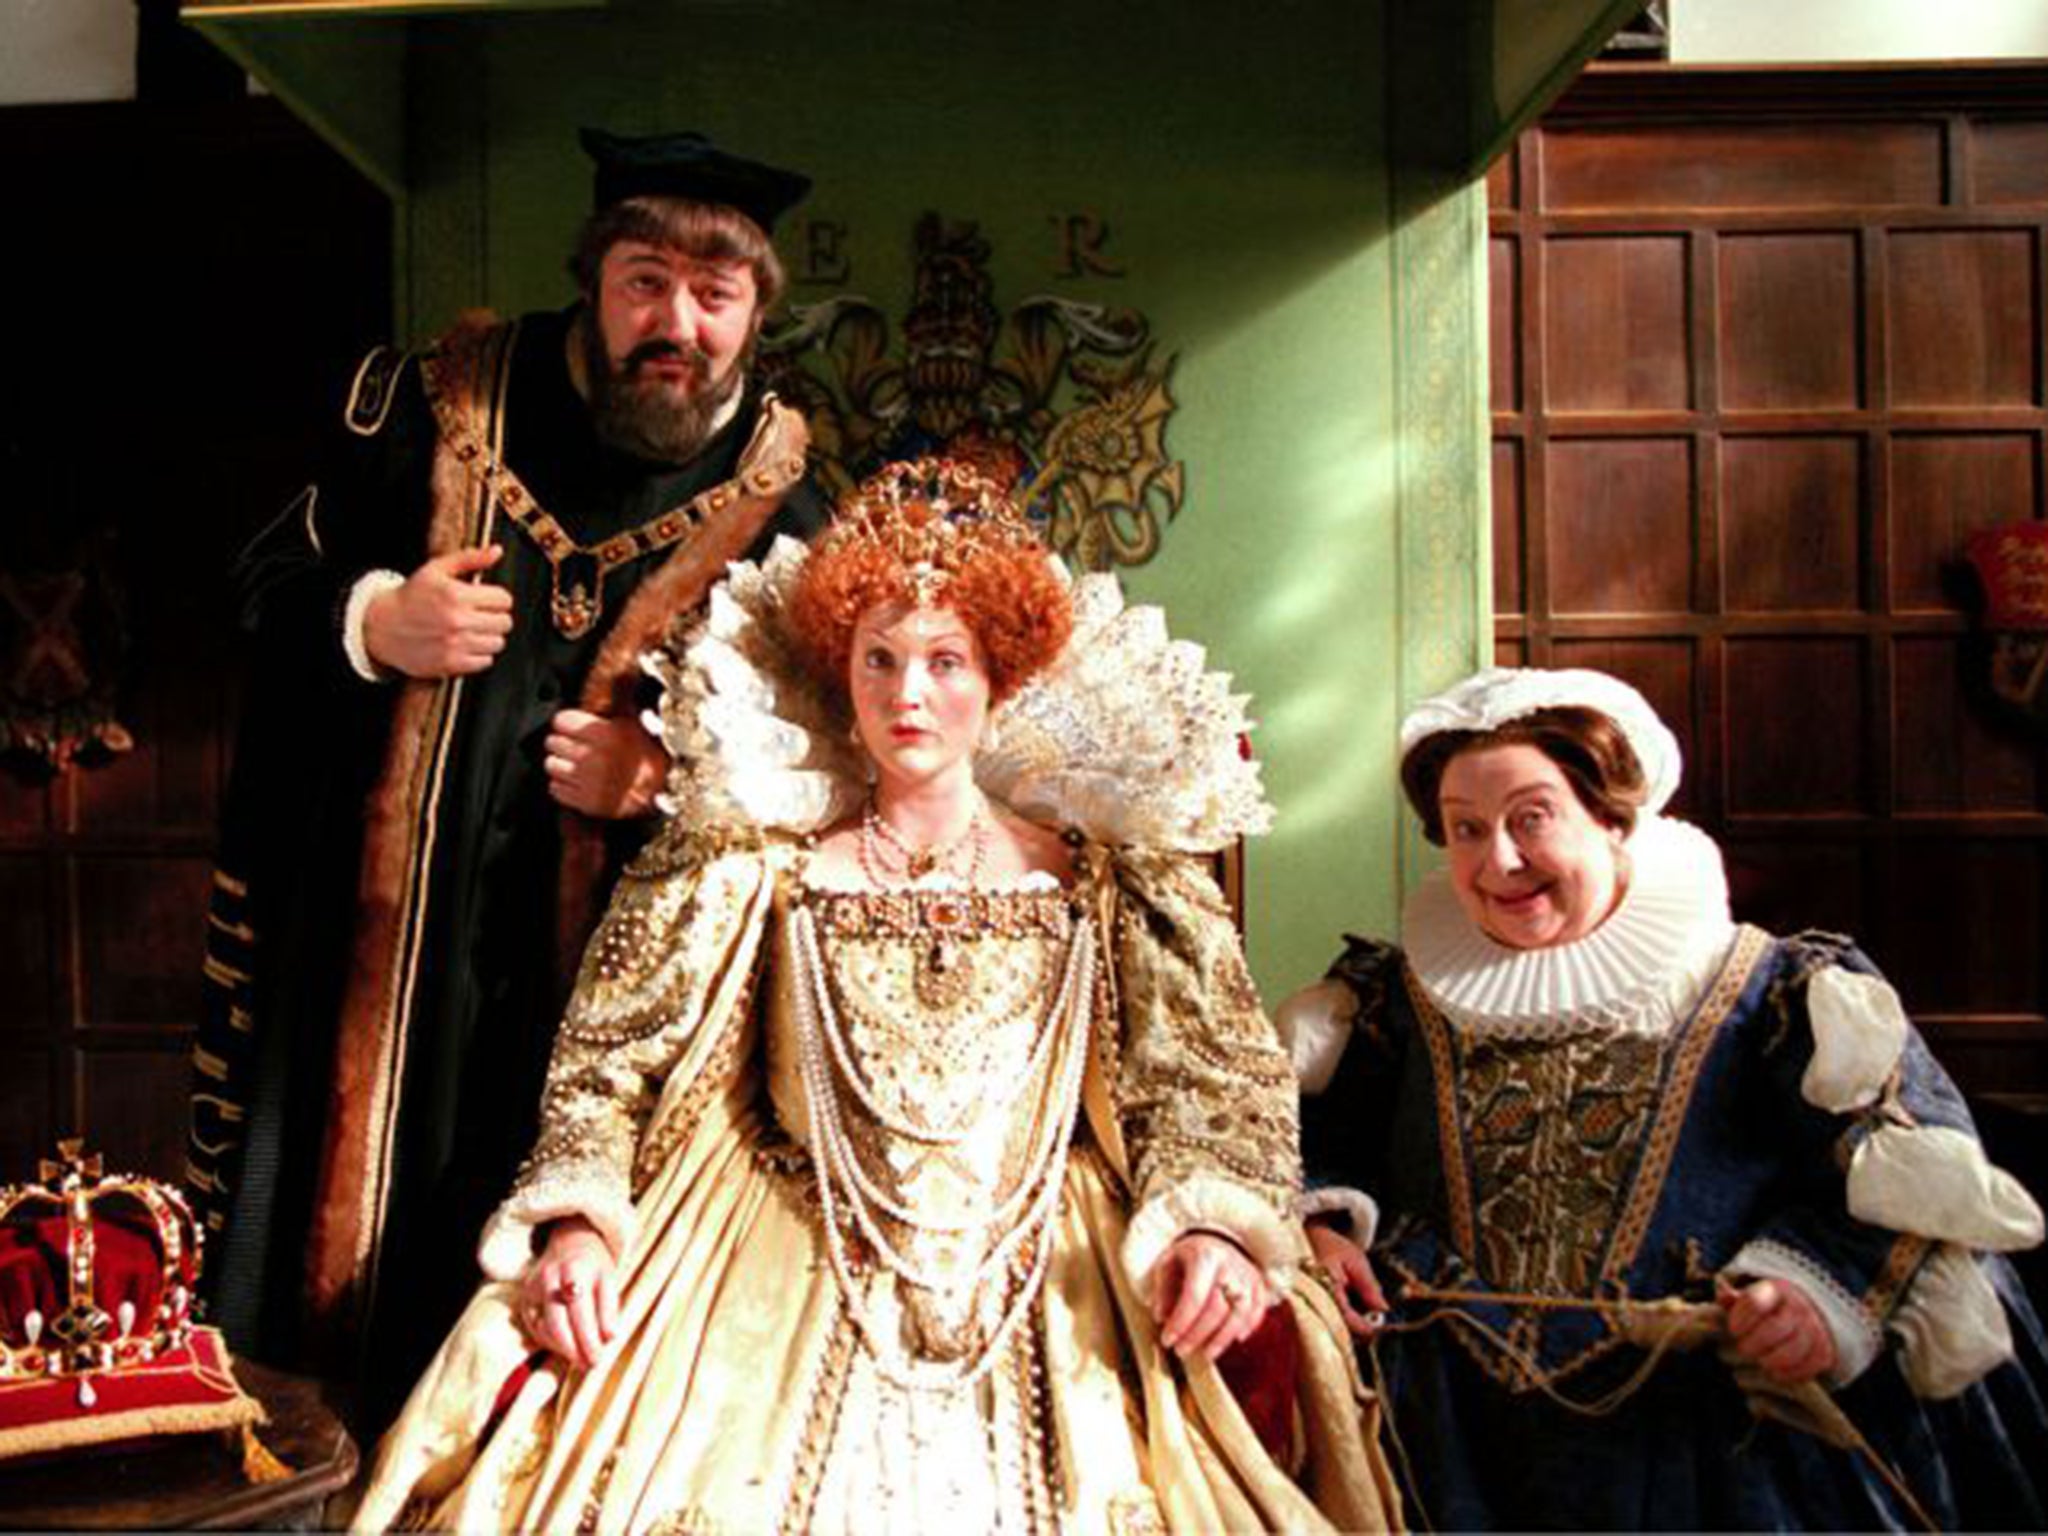 The cast of Blackadder thought it wise to not reconvene